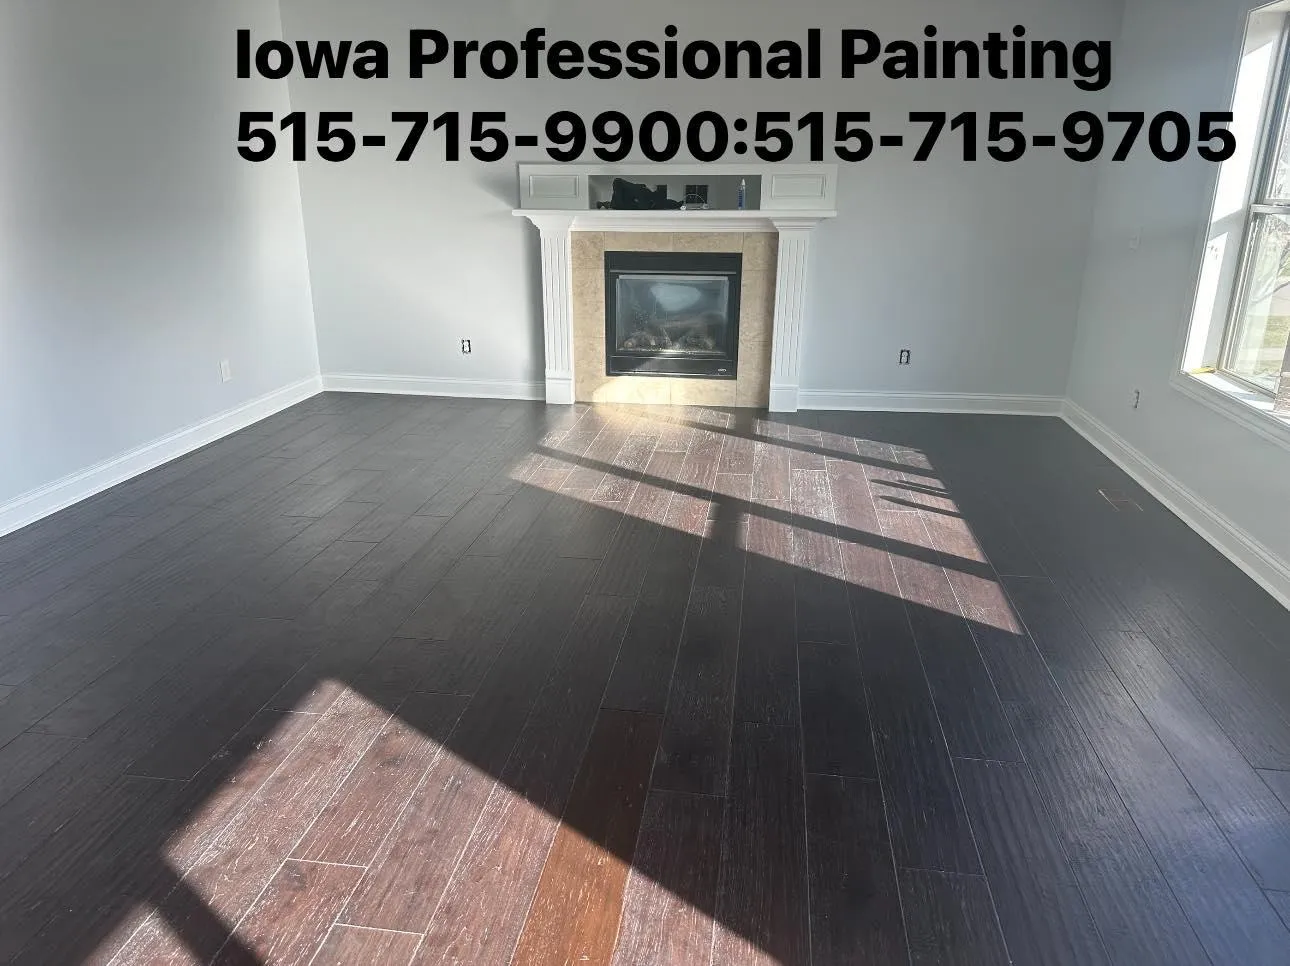 Interior Painting for Iowa Professional Painting in Des Moines, IA